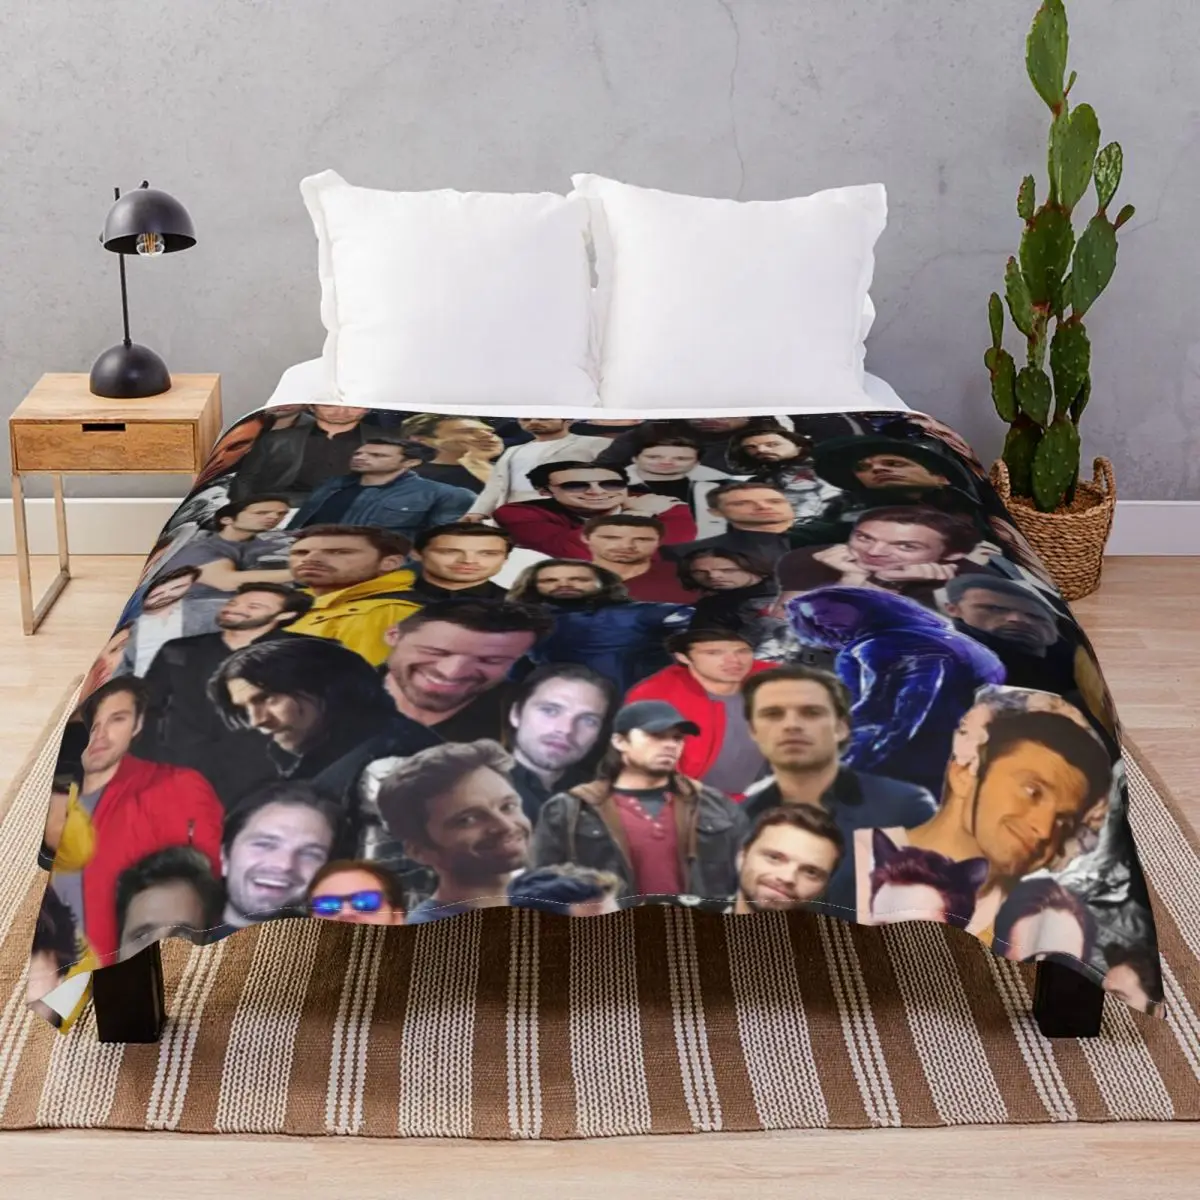 Sebastian Stan College Blankets Flannel Textile Decor Multi-function Throw Blanket for Bedding Home Couch Camp Office